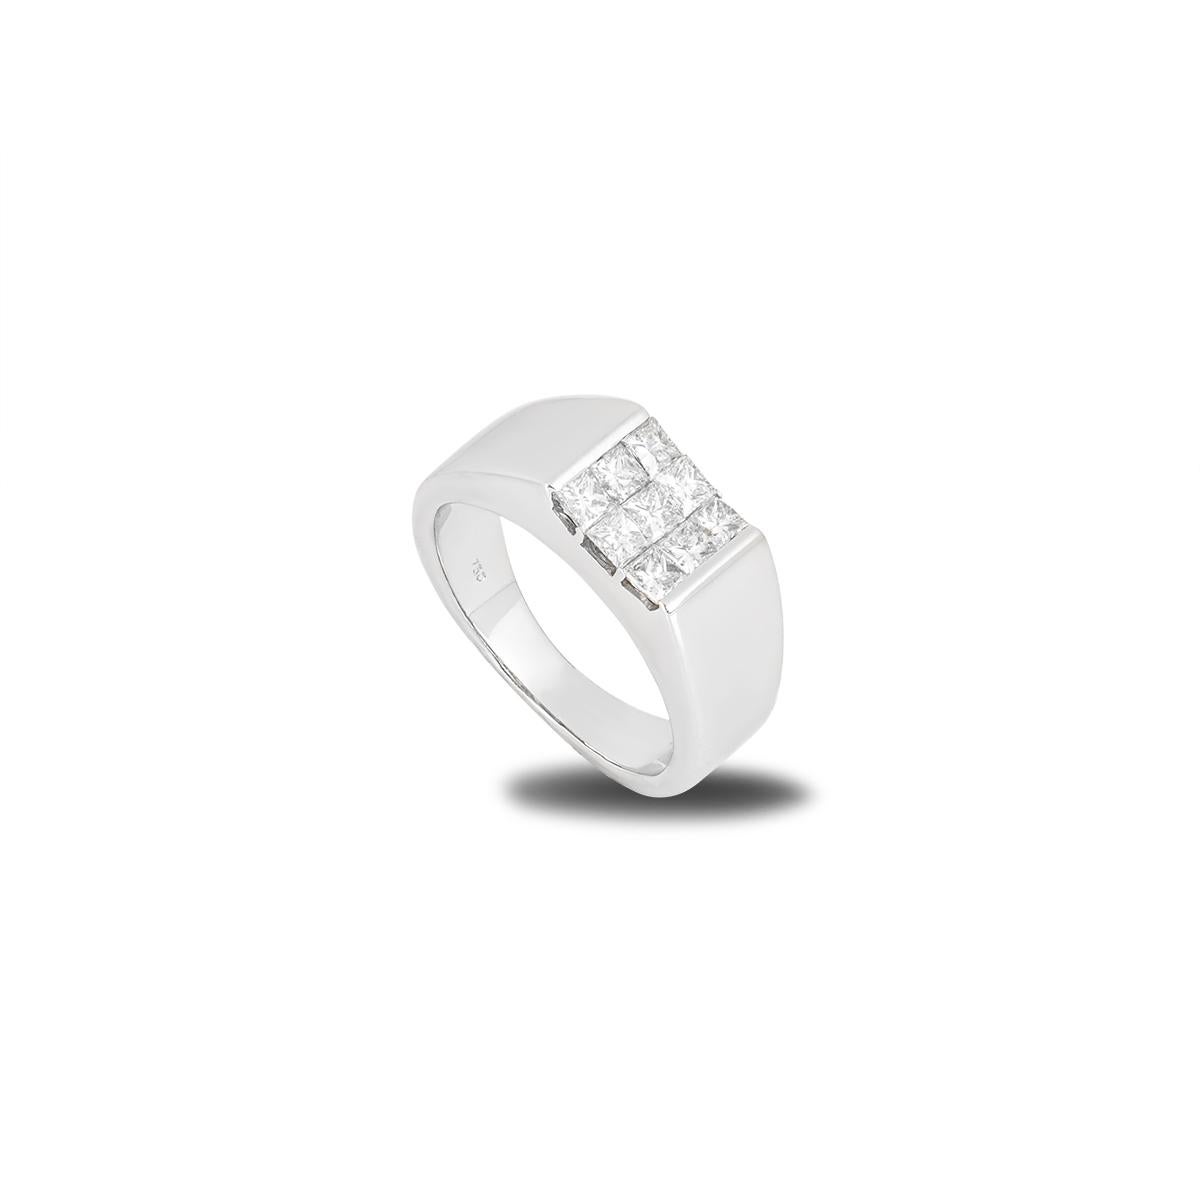 An 18k white gold diamond signet ring. The ring comprises of 9 princess cut diamonds set across 3 rows in a tension setting, with a total diamond weight of approximately 0.70ct. Measuring at 8mm the band tapers down to 4mm, it is a size UK O, US 7